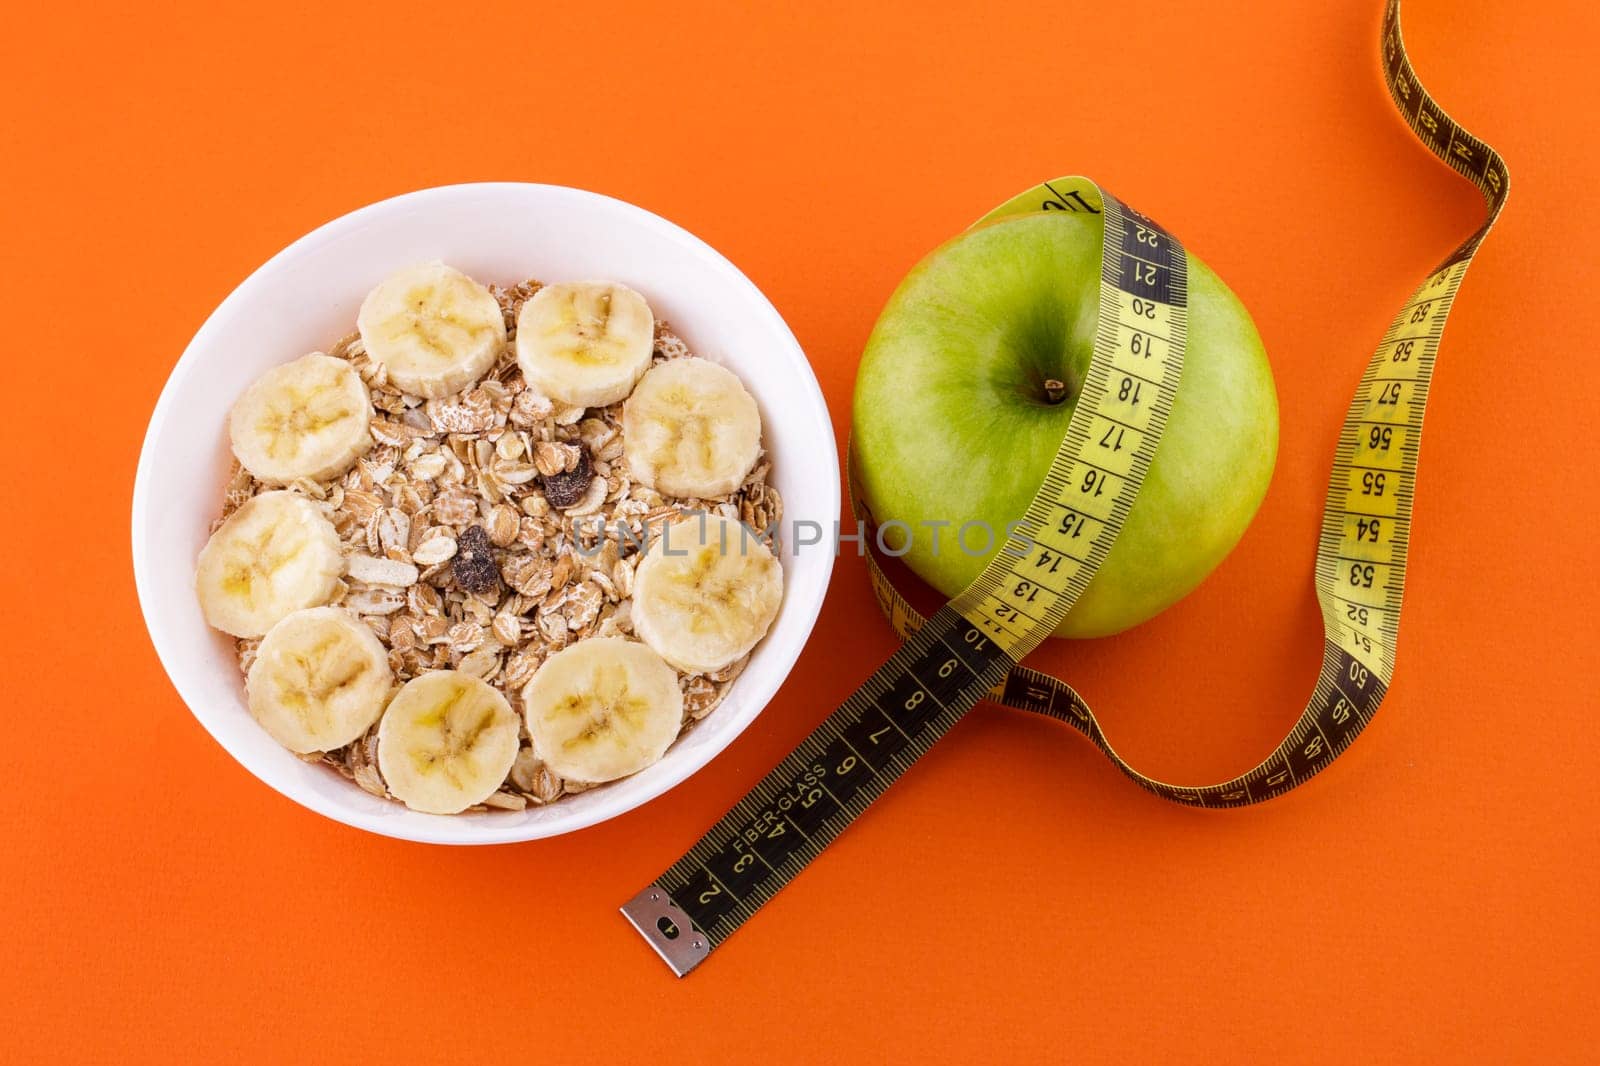 muesli with banana in a white plate on an orange background, green apple with a yellow measuring tape. Healthy food and diet concept